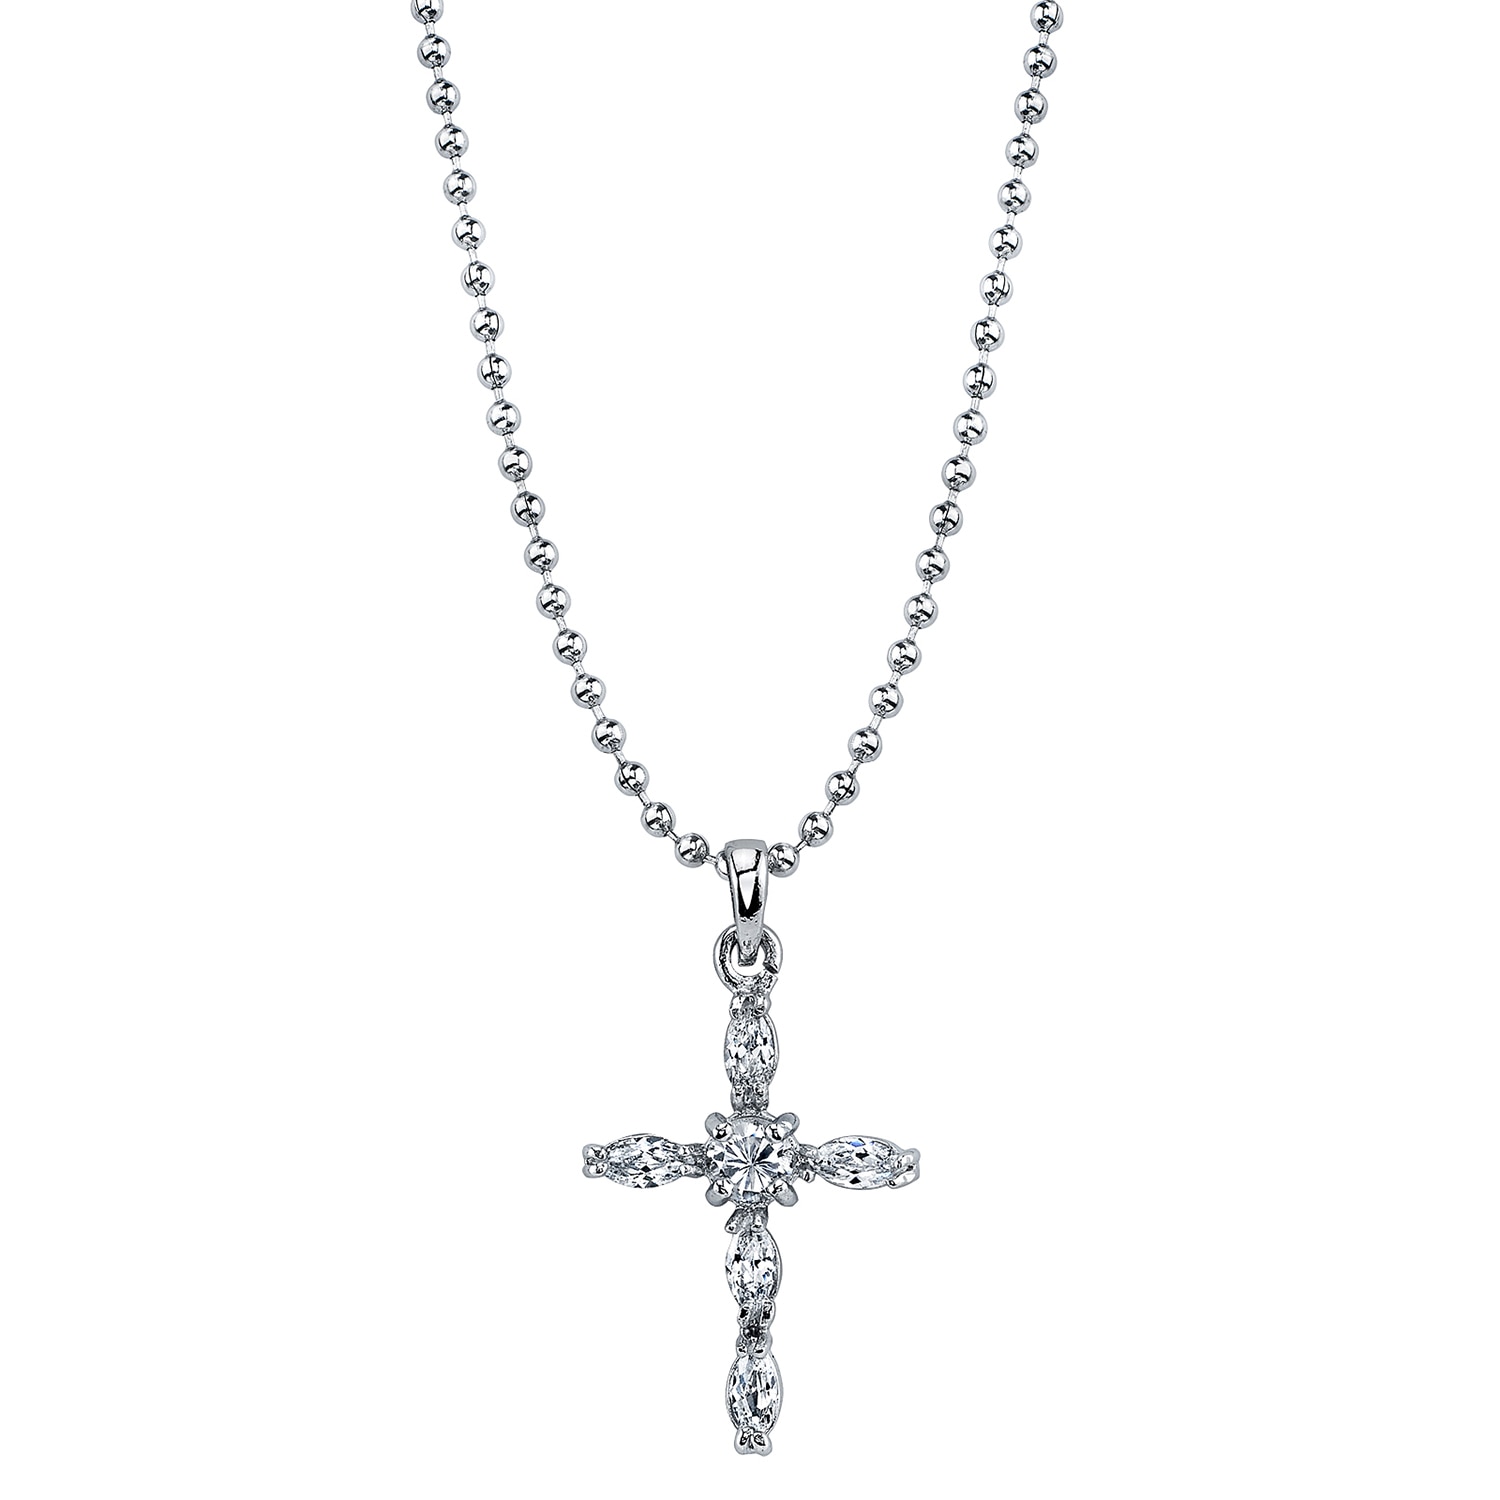 1928 Symbols of Faith crystal cross necklace 20 inch chain